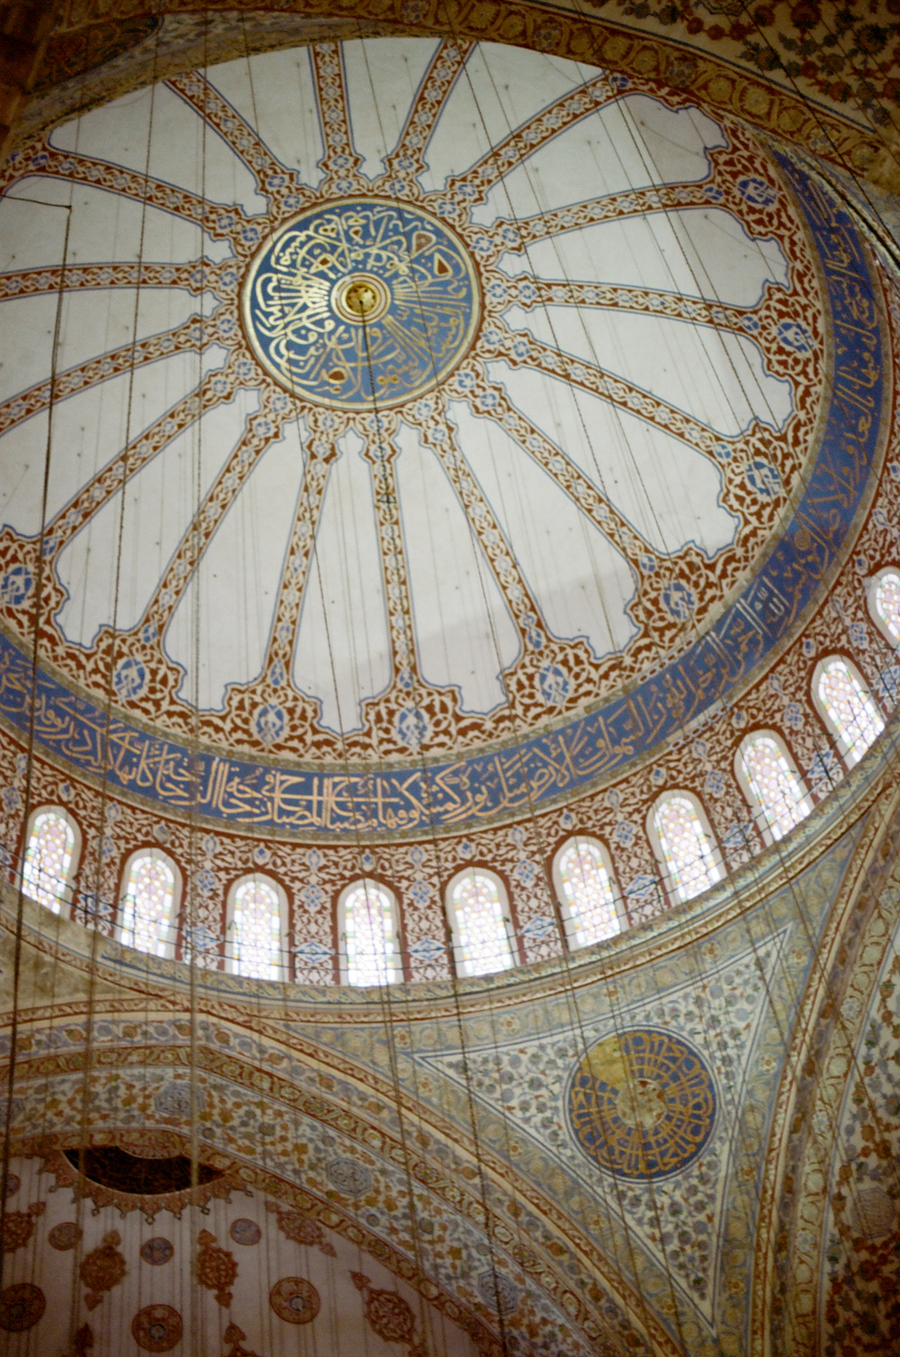 Detailed Ceiling at the Istanbul Blue Mosque